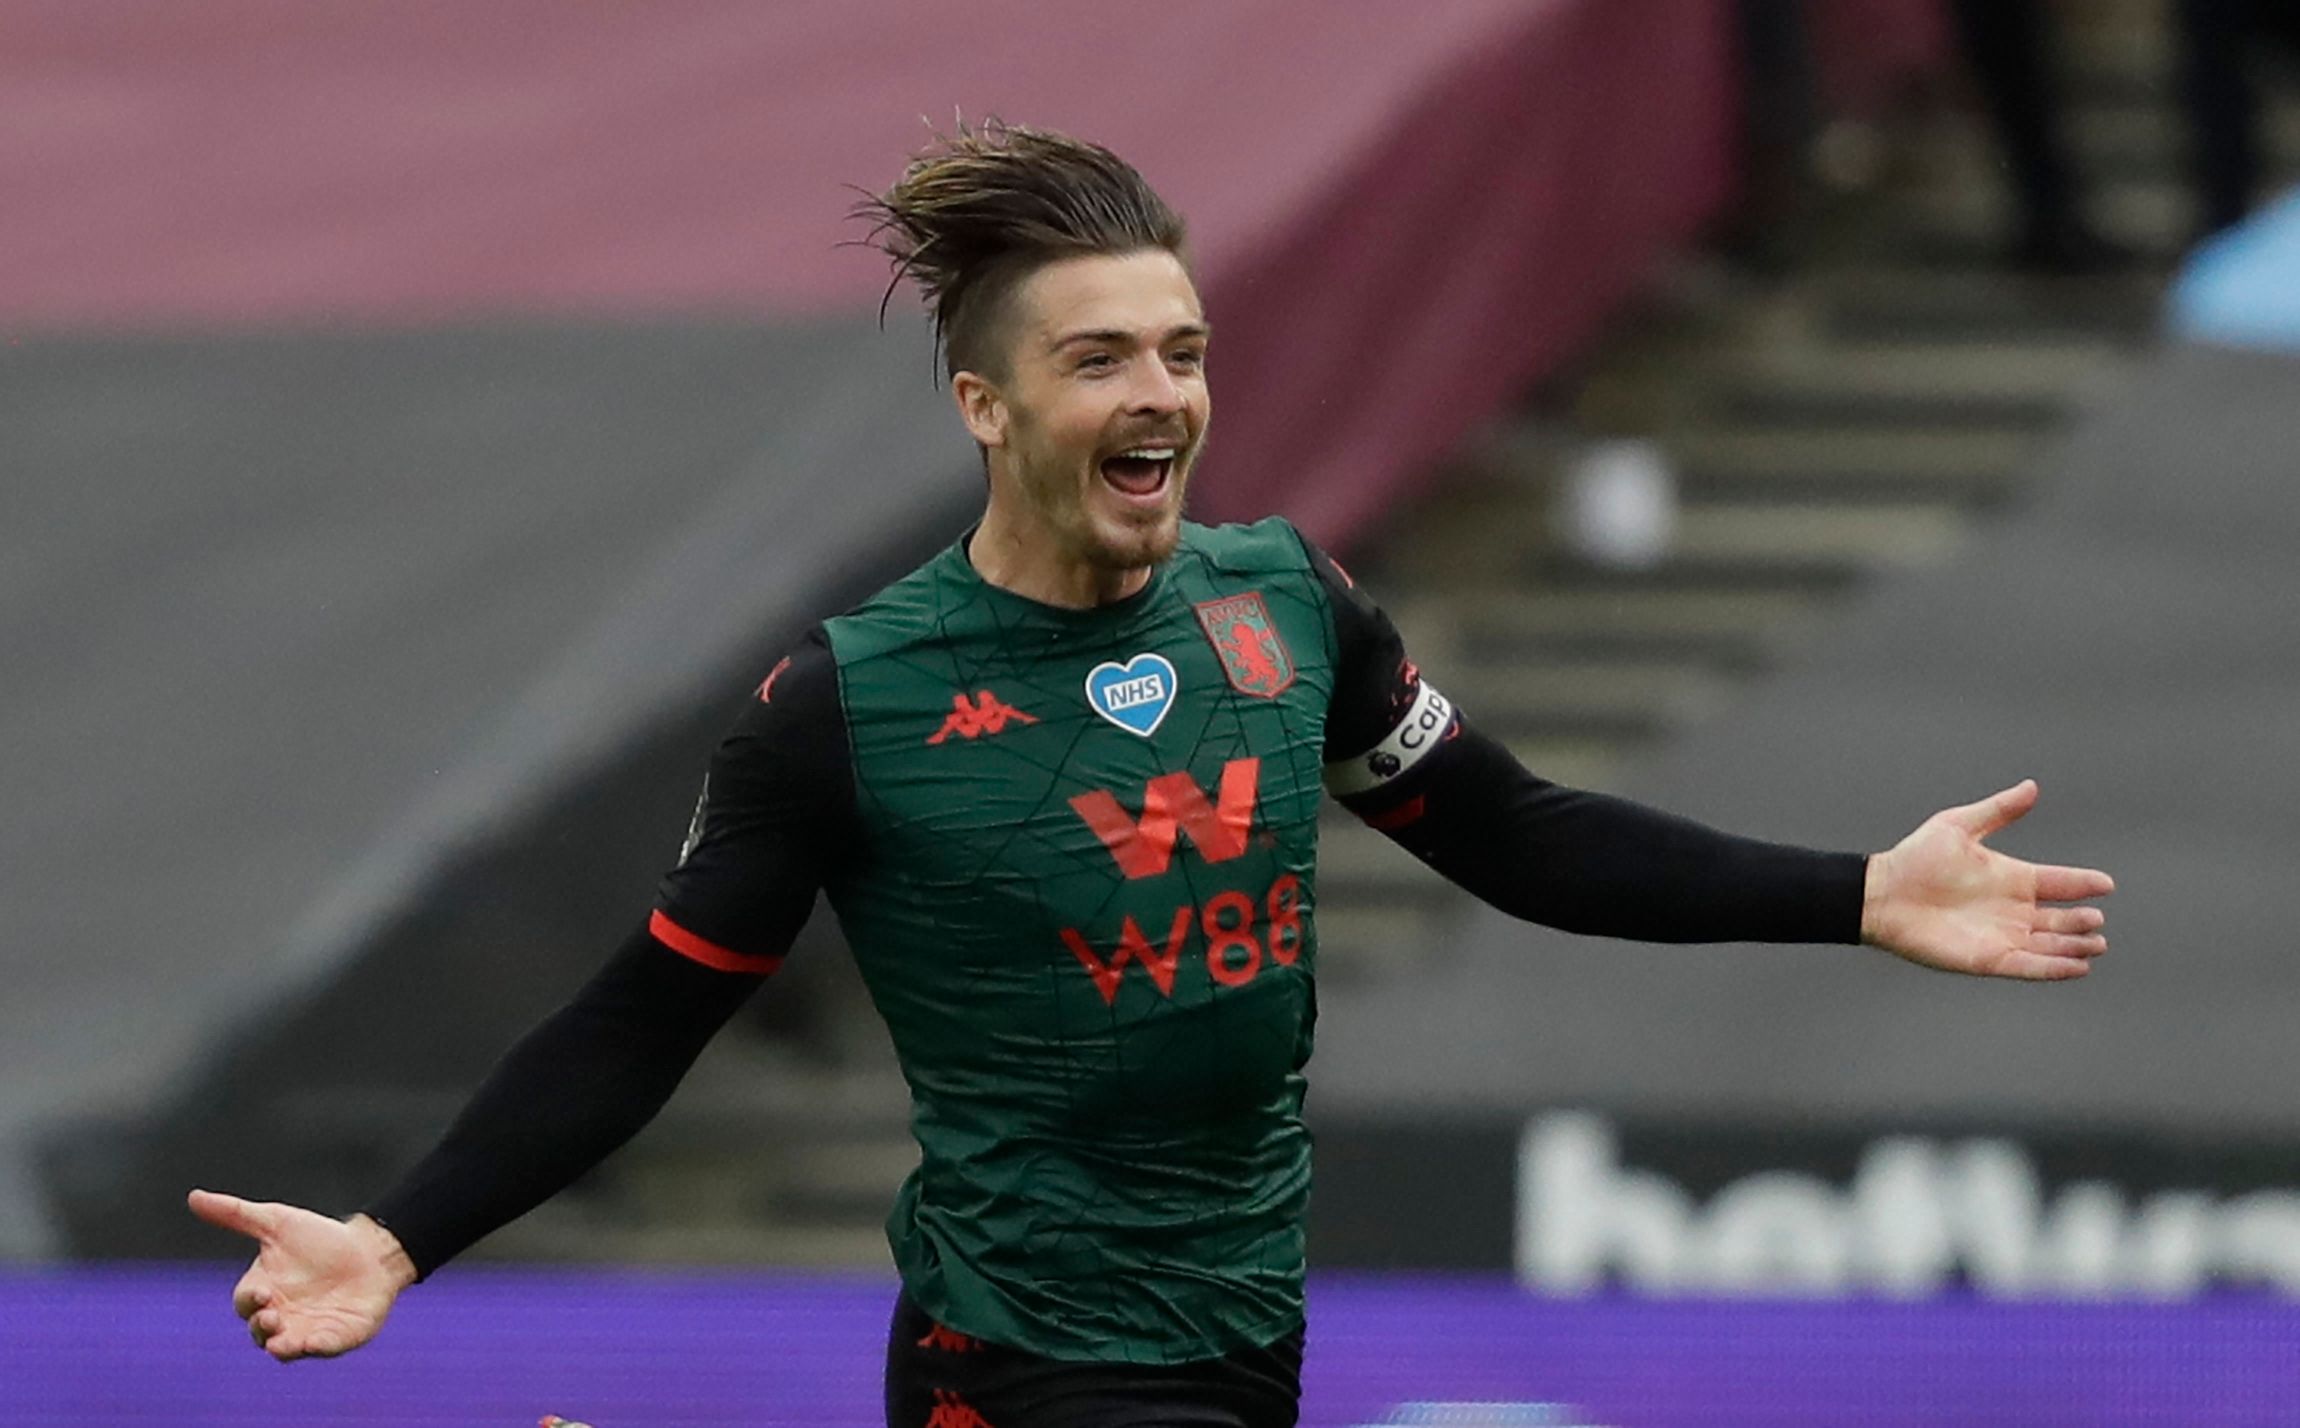 Where does Grealish stand among the worlds costliest football transfers?